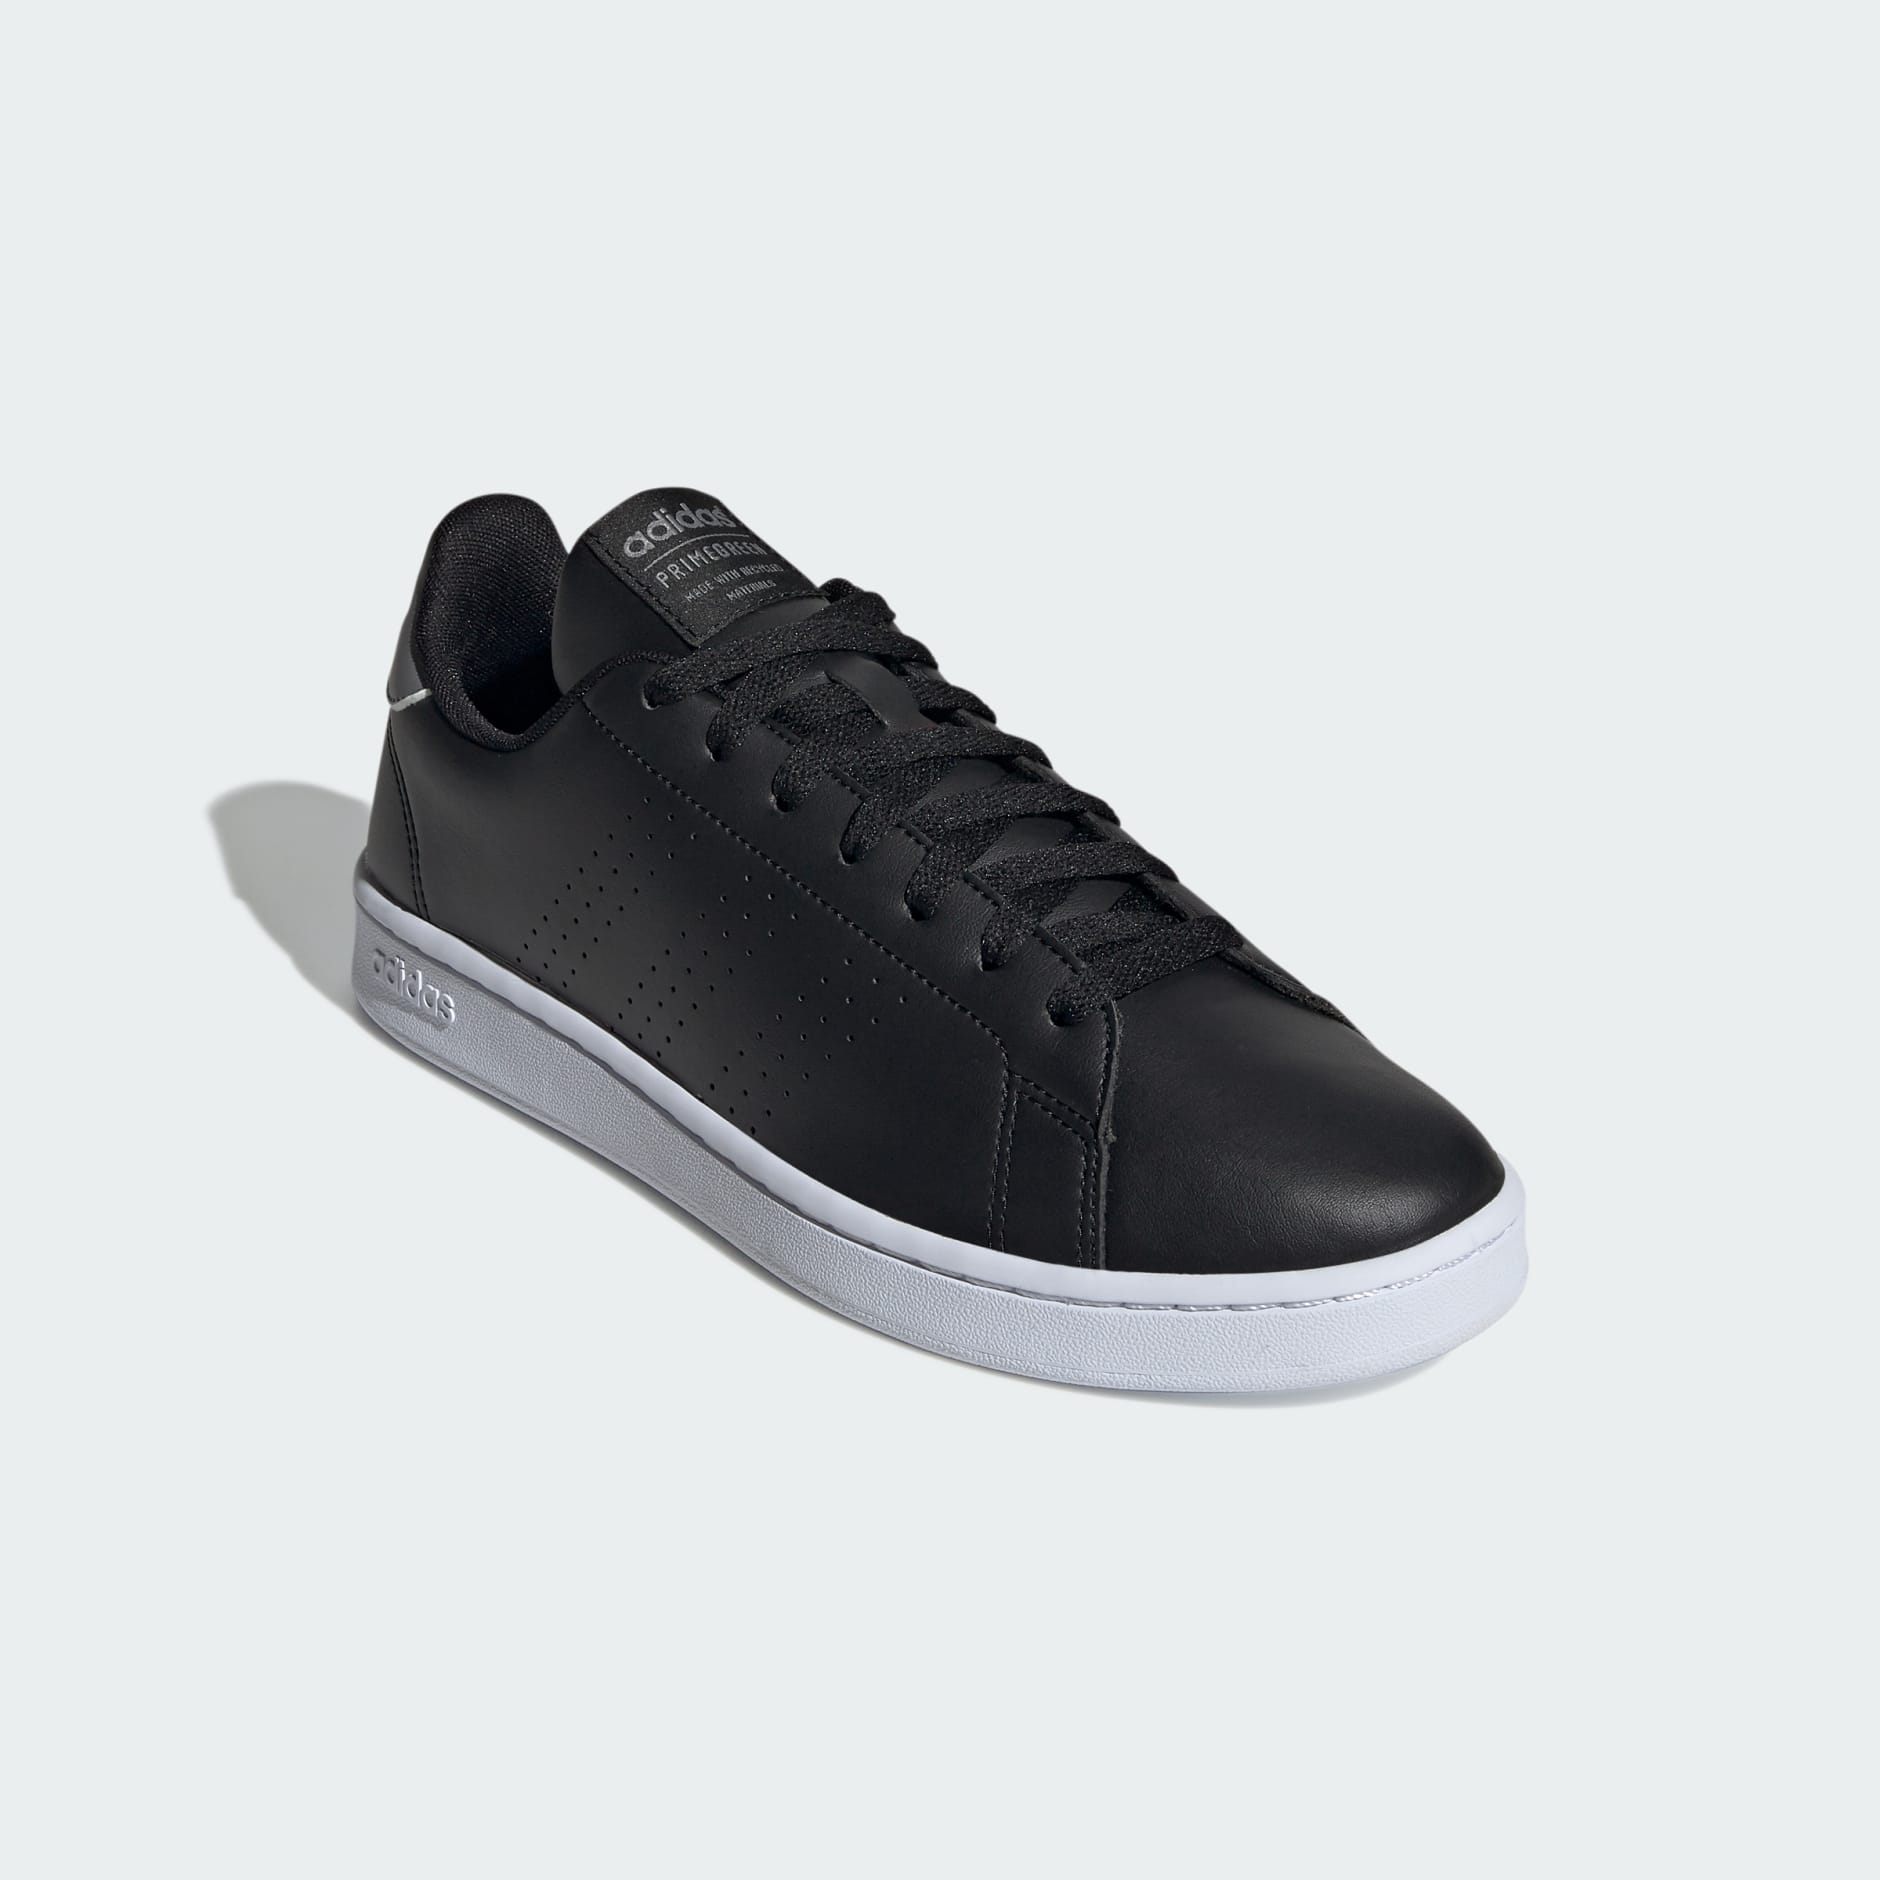 ADIDAS NEO CF ADVANTAGE CL Sneakers For Men - Buy CONAVY/CONAVY/SOLBLU  Color ADIDAS NEO CF ADVANTAGE CL Sneakers For Men Online at Best Price -  Shop Online for Footwears in India |